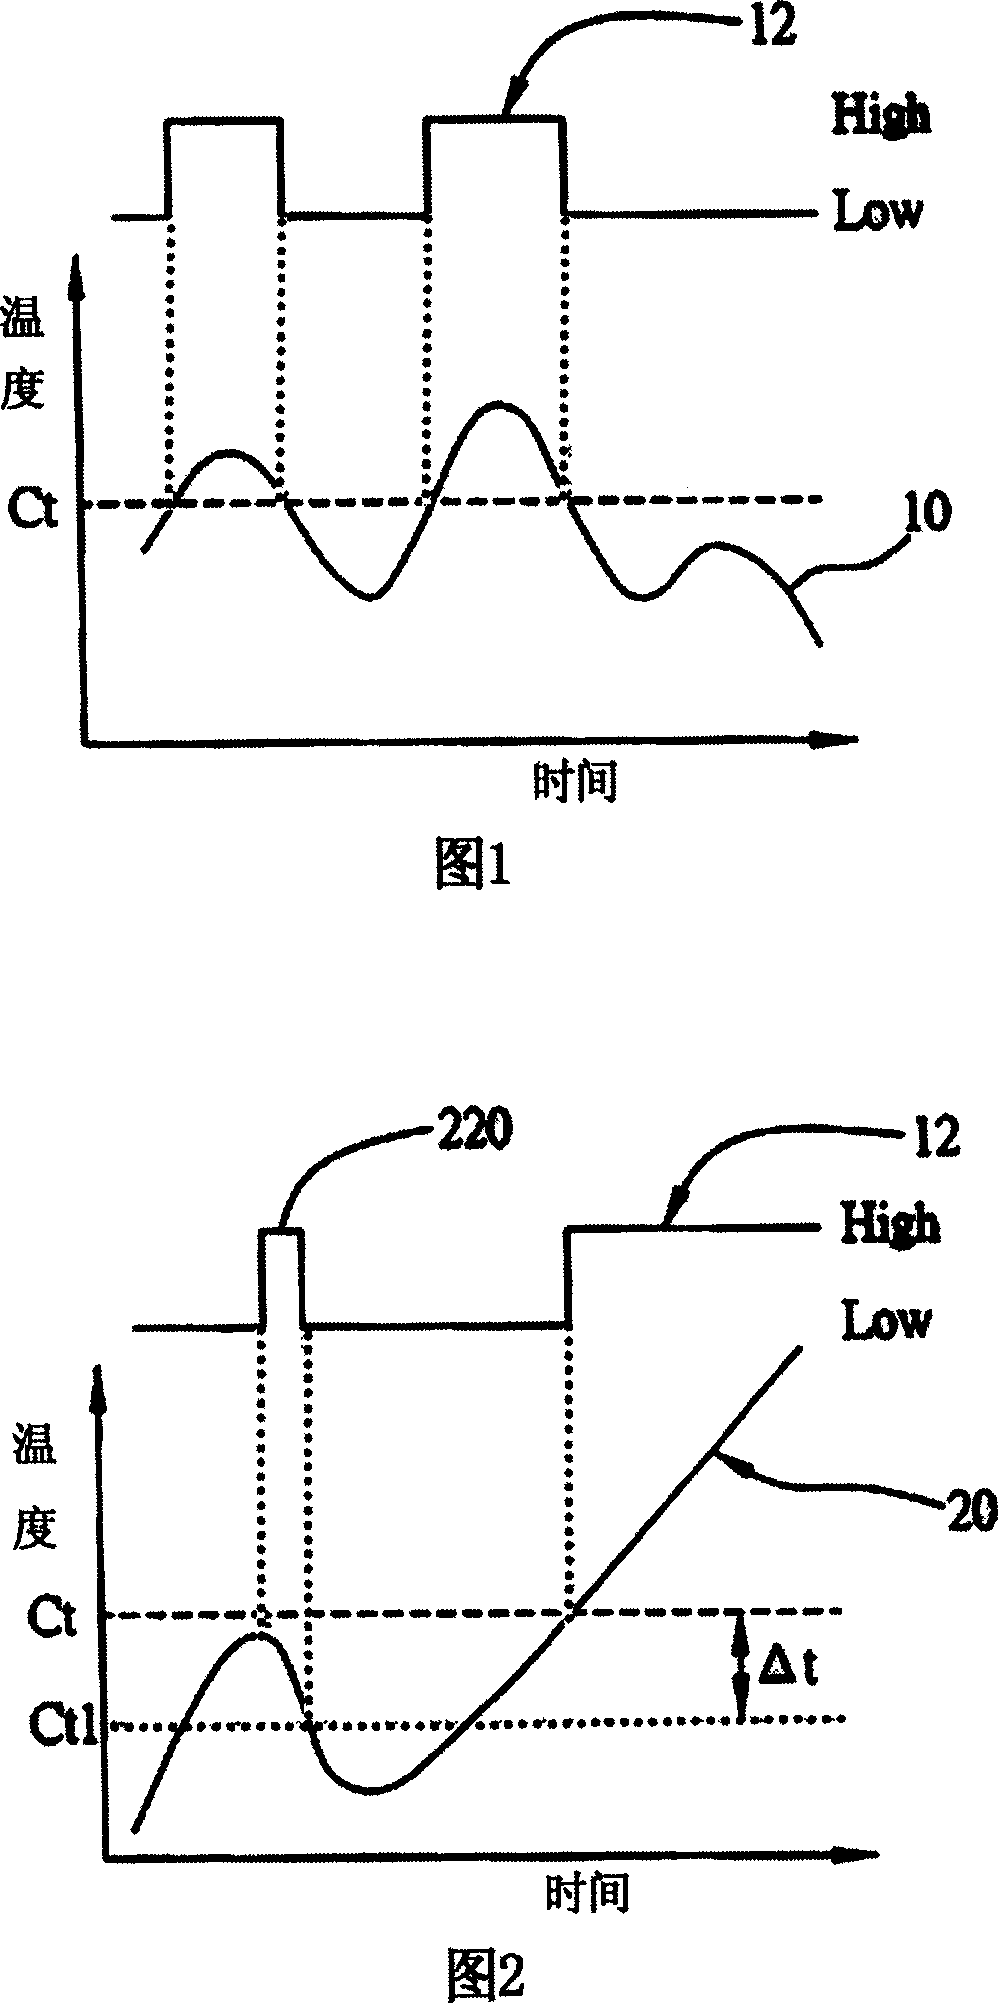 System and method for controlling  rotational speed of fan